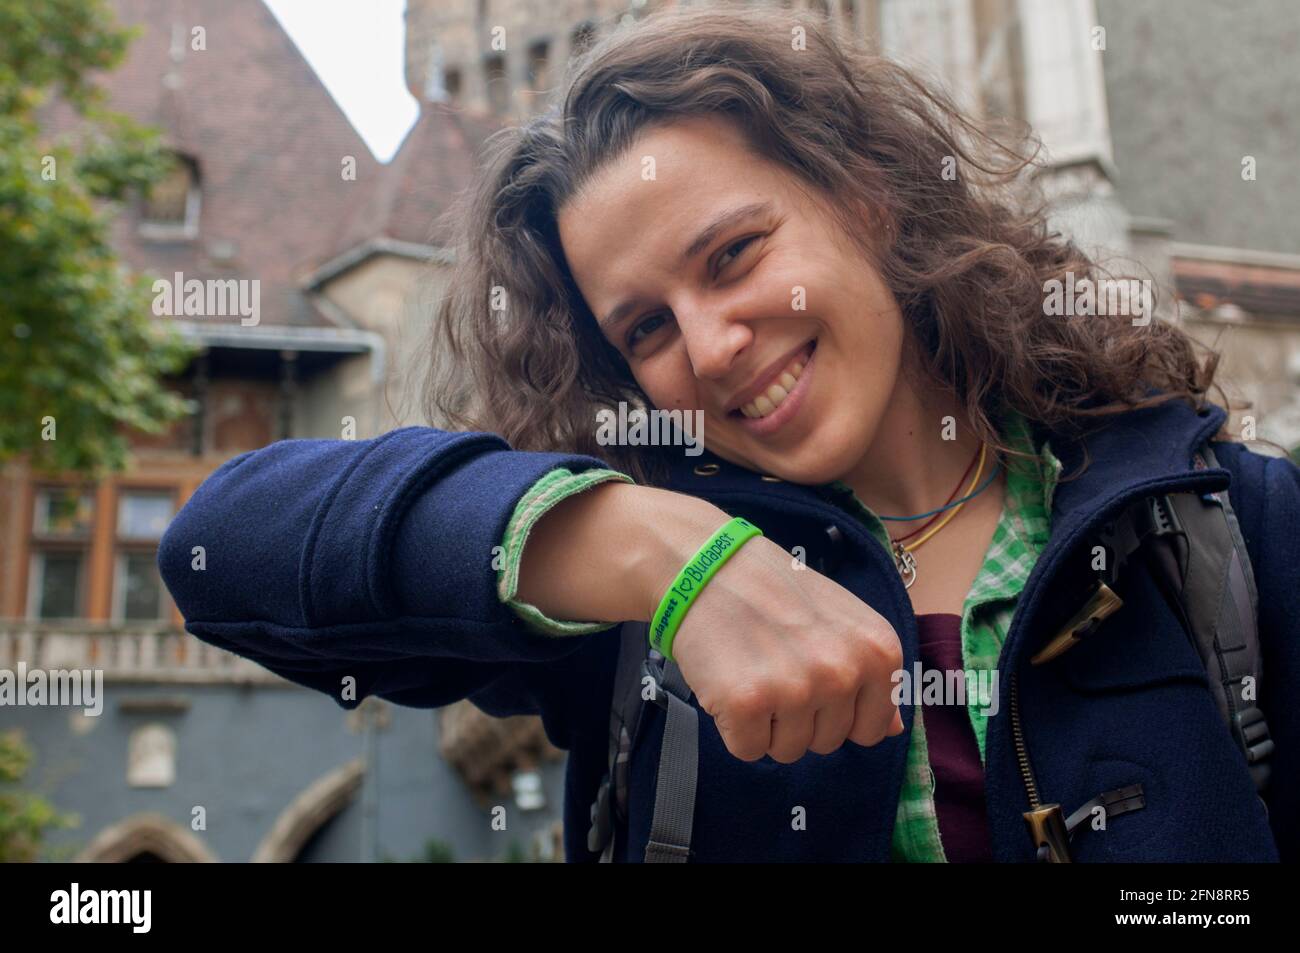 Young smiley woman wearing a 'I Love Budapest' bracelet. Being a tourist in Hungary. Stock Photo